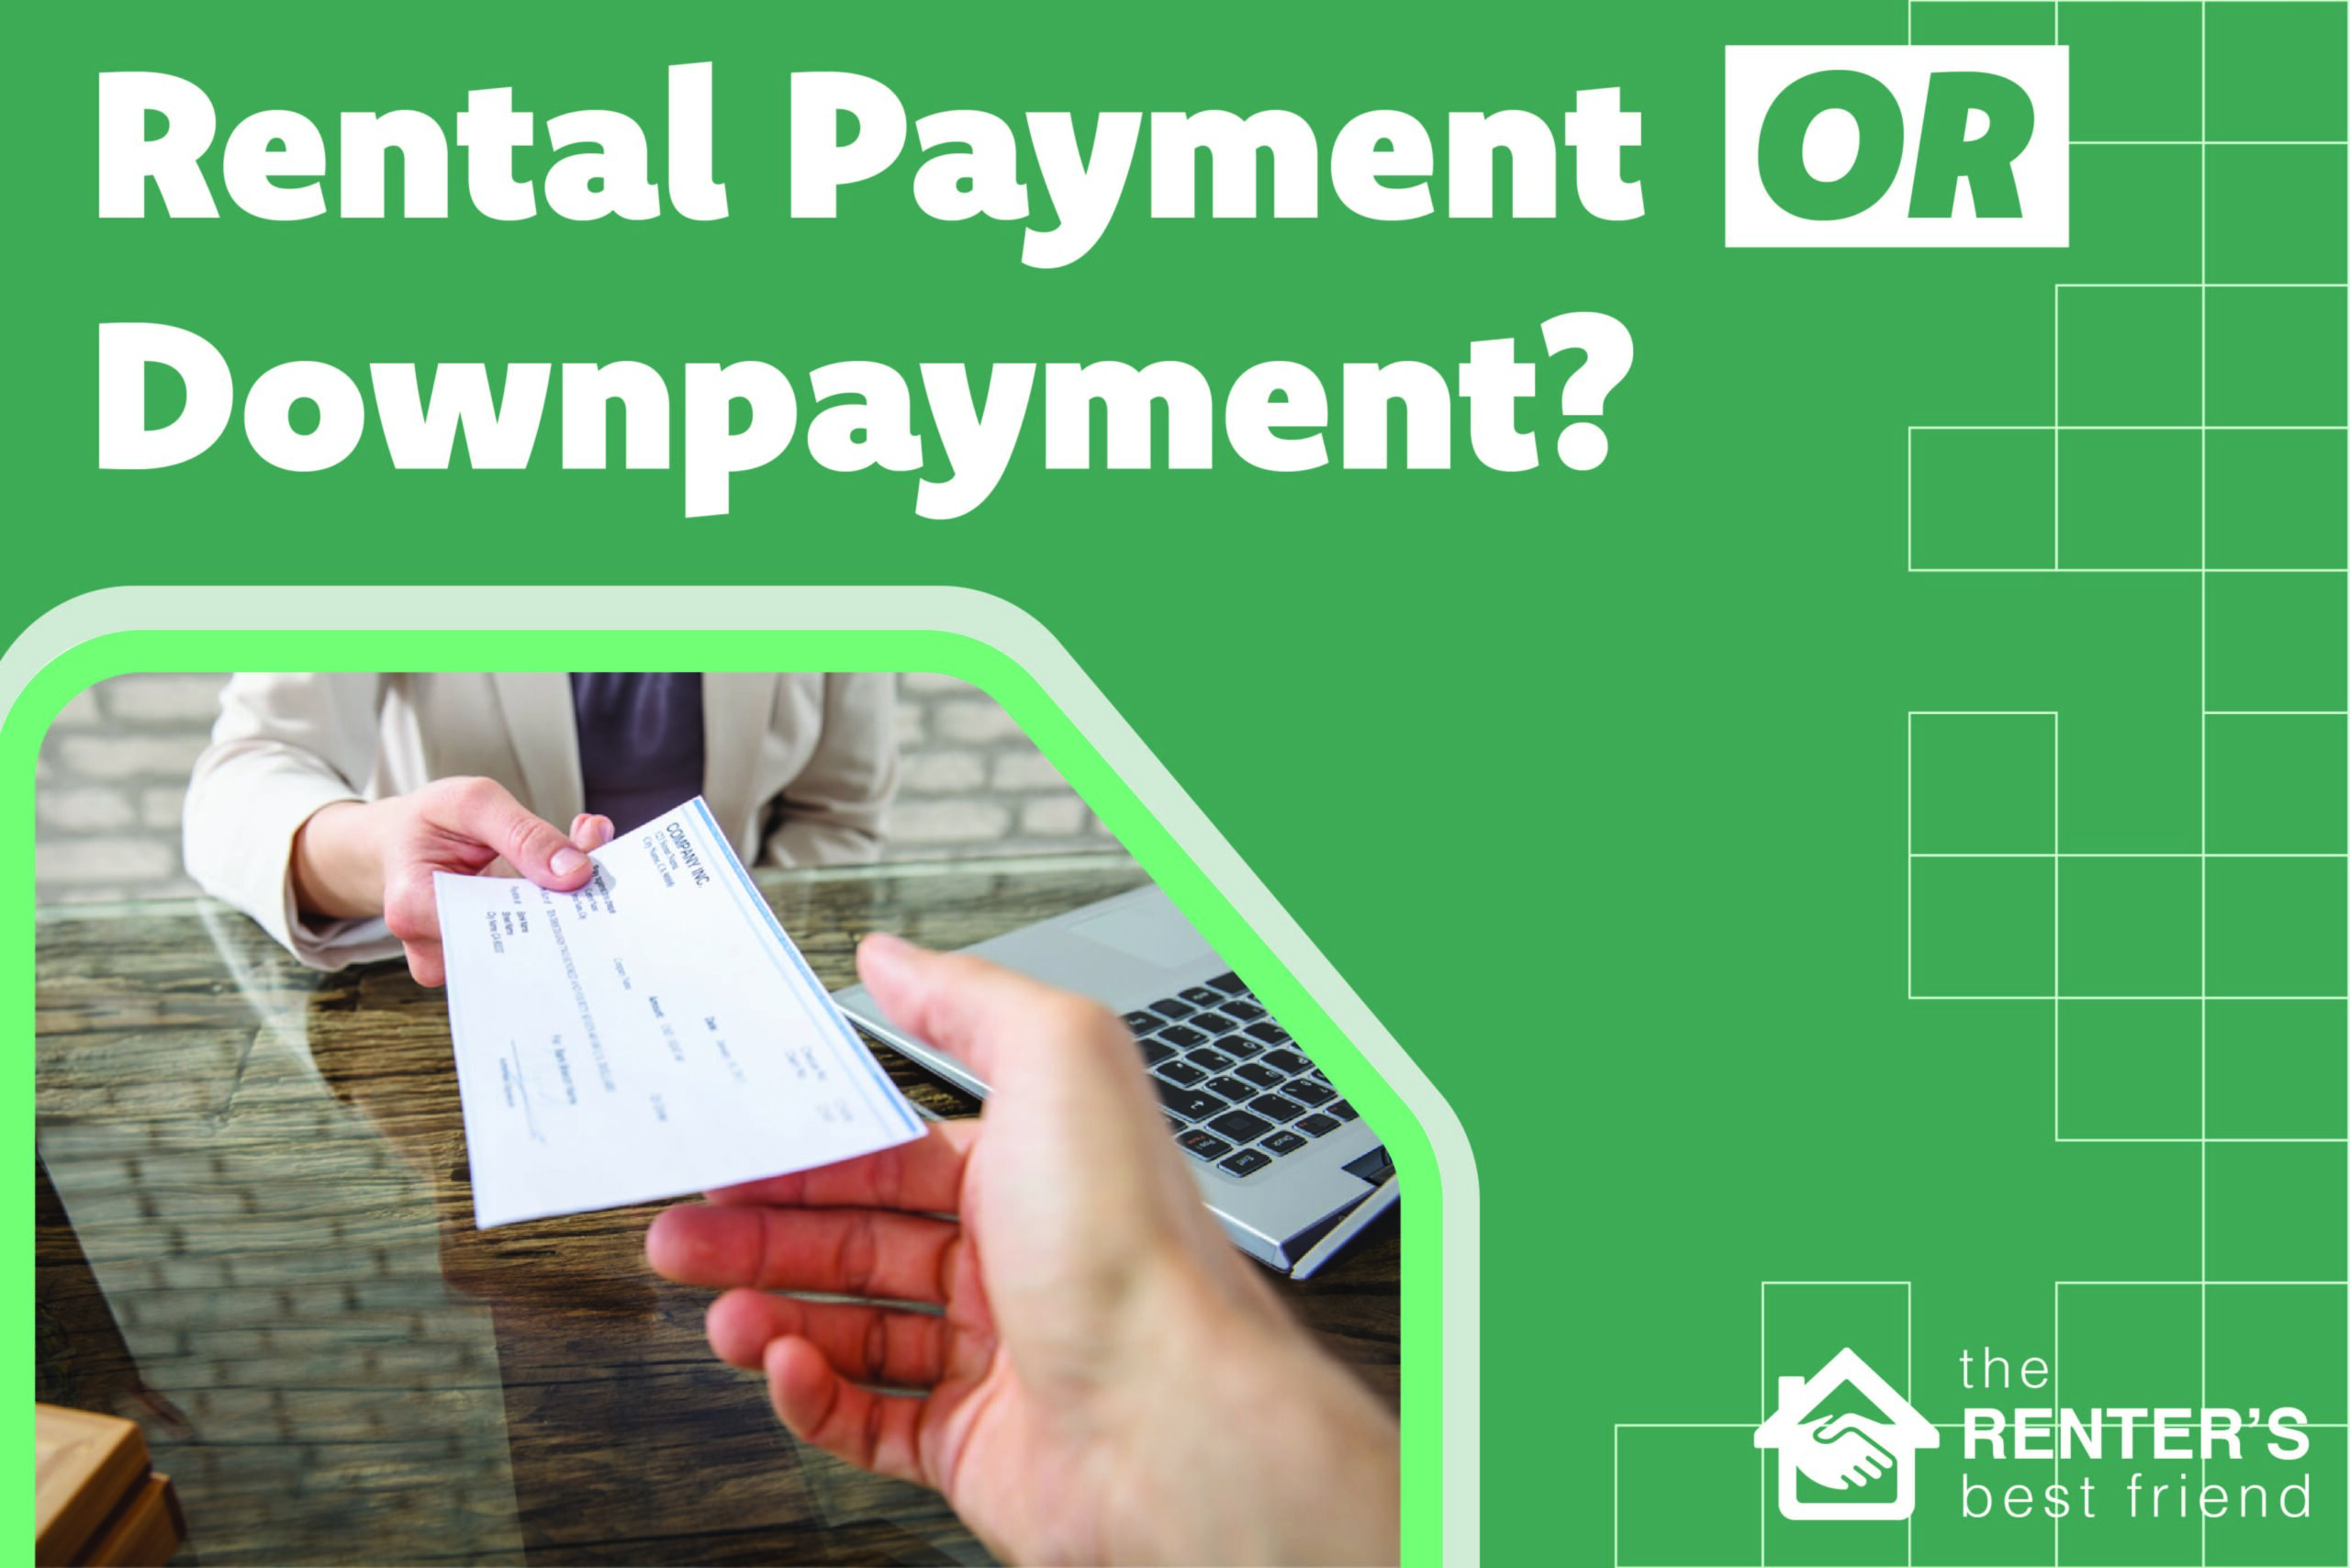 Rental payment or downpayment?